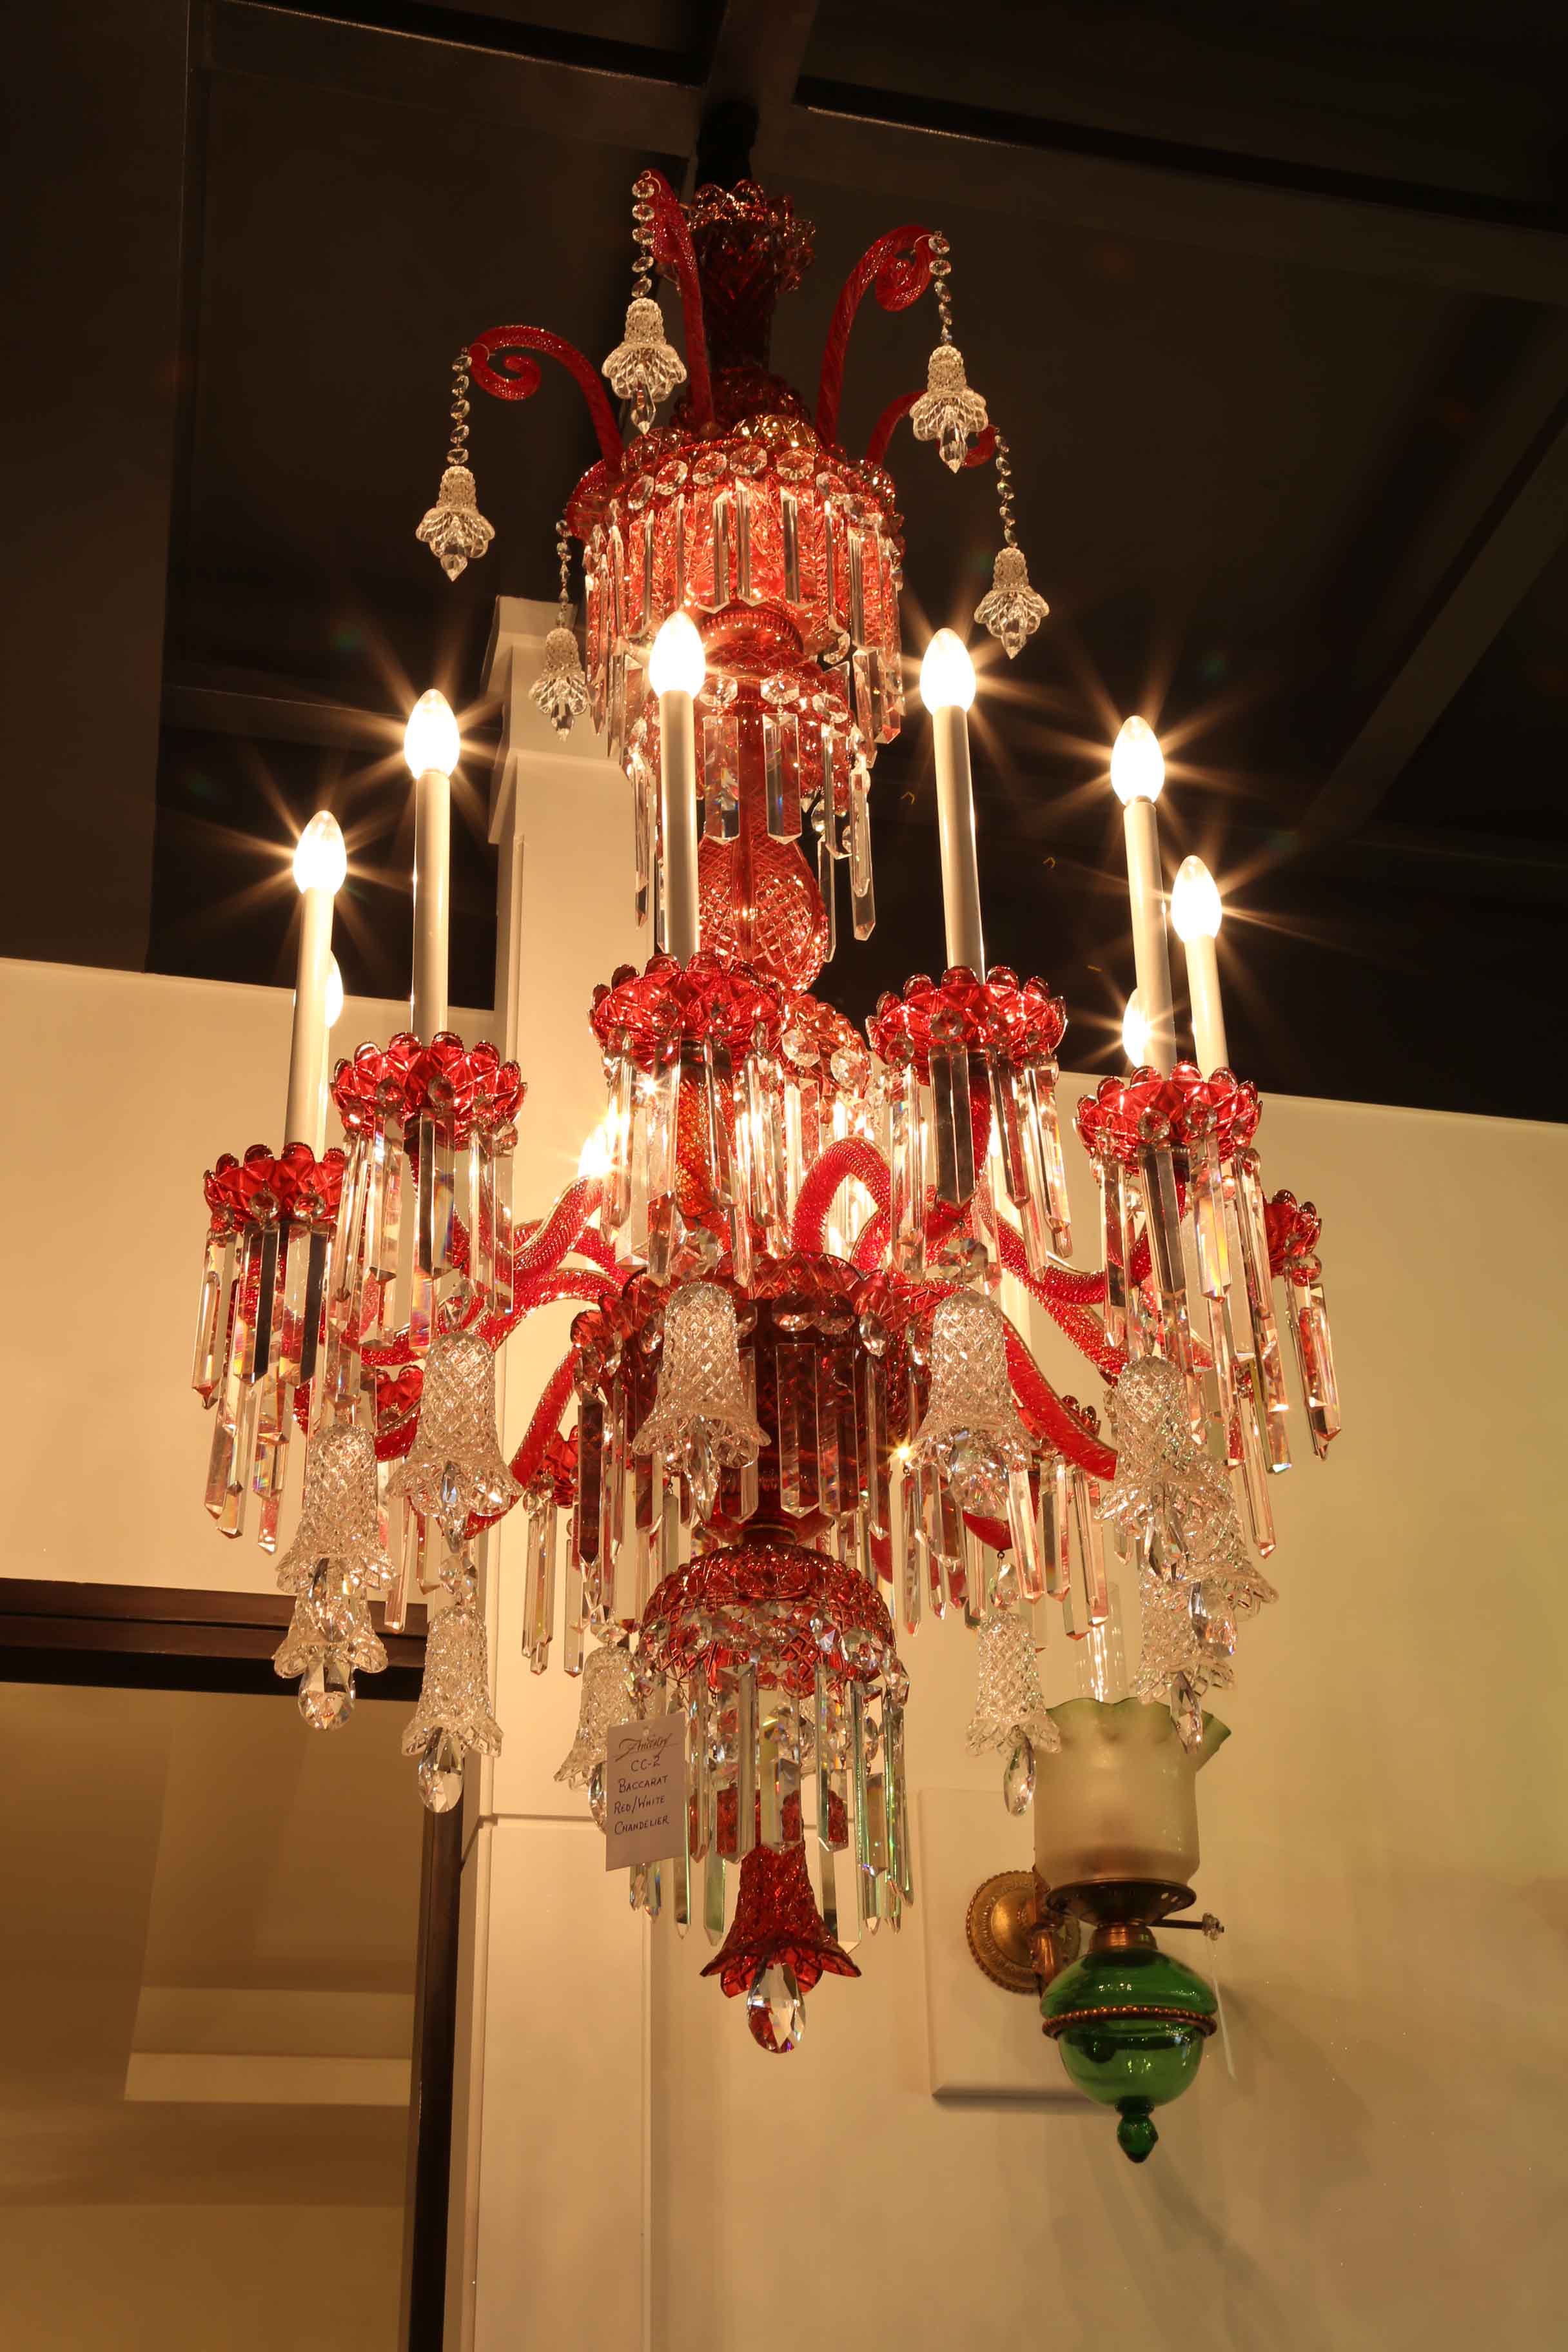 RED BACCARAT CHANDELIER